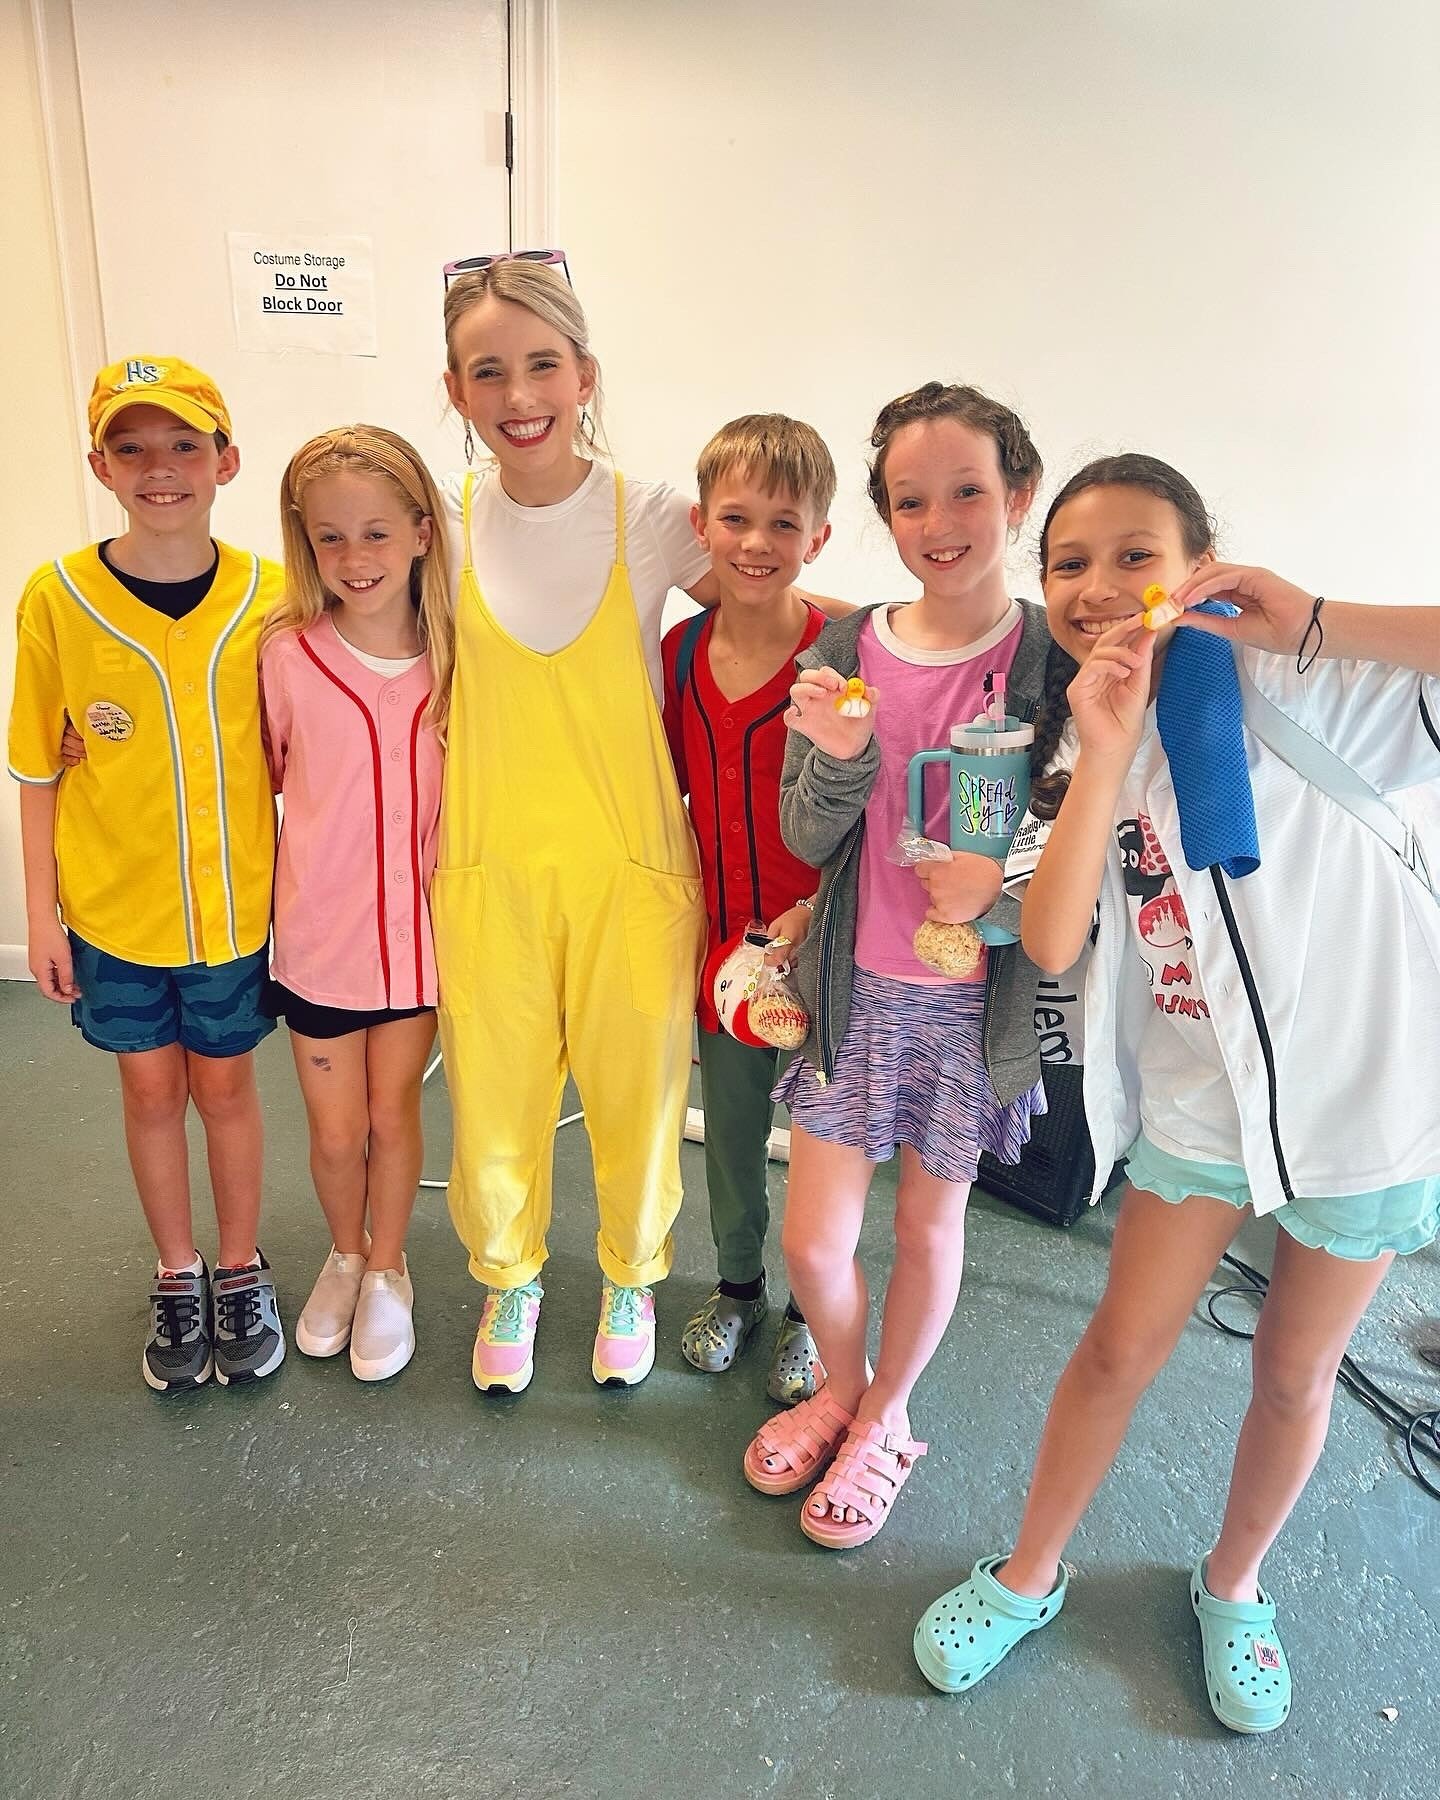 What a gift it was getting to work with students Adalynn Alexander, Jane Kelley, Aidan Summa, Raelyn Earley, and Logan Angelcyk in &ldquo;Looking for Roberto Clemente&rdquo; at Raleigh Little Theatre! 🥰 I was their choreographer and it was so fun to